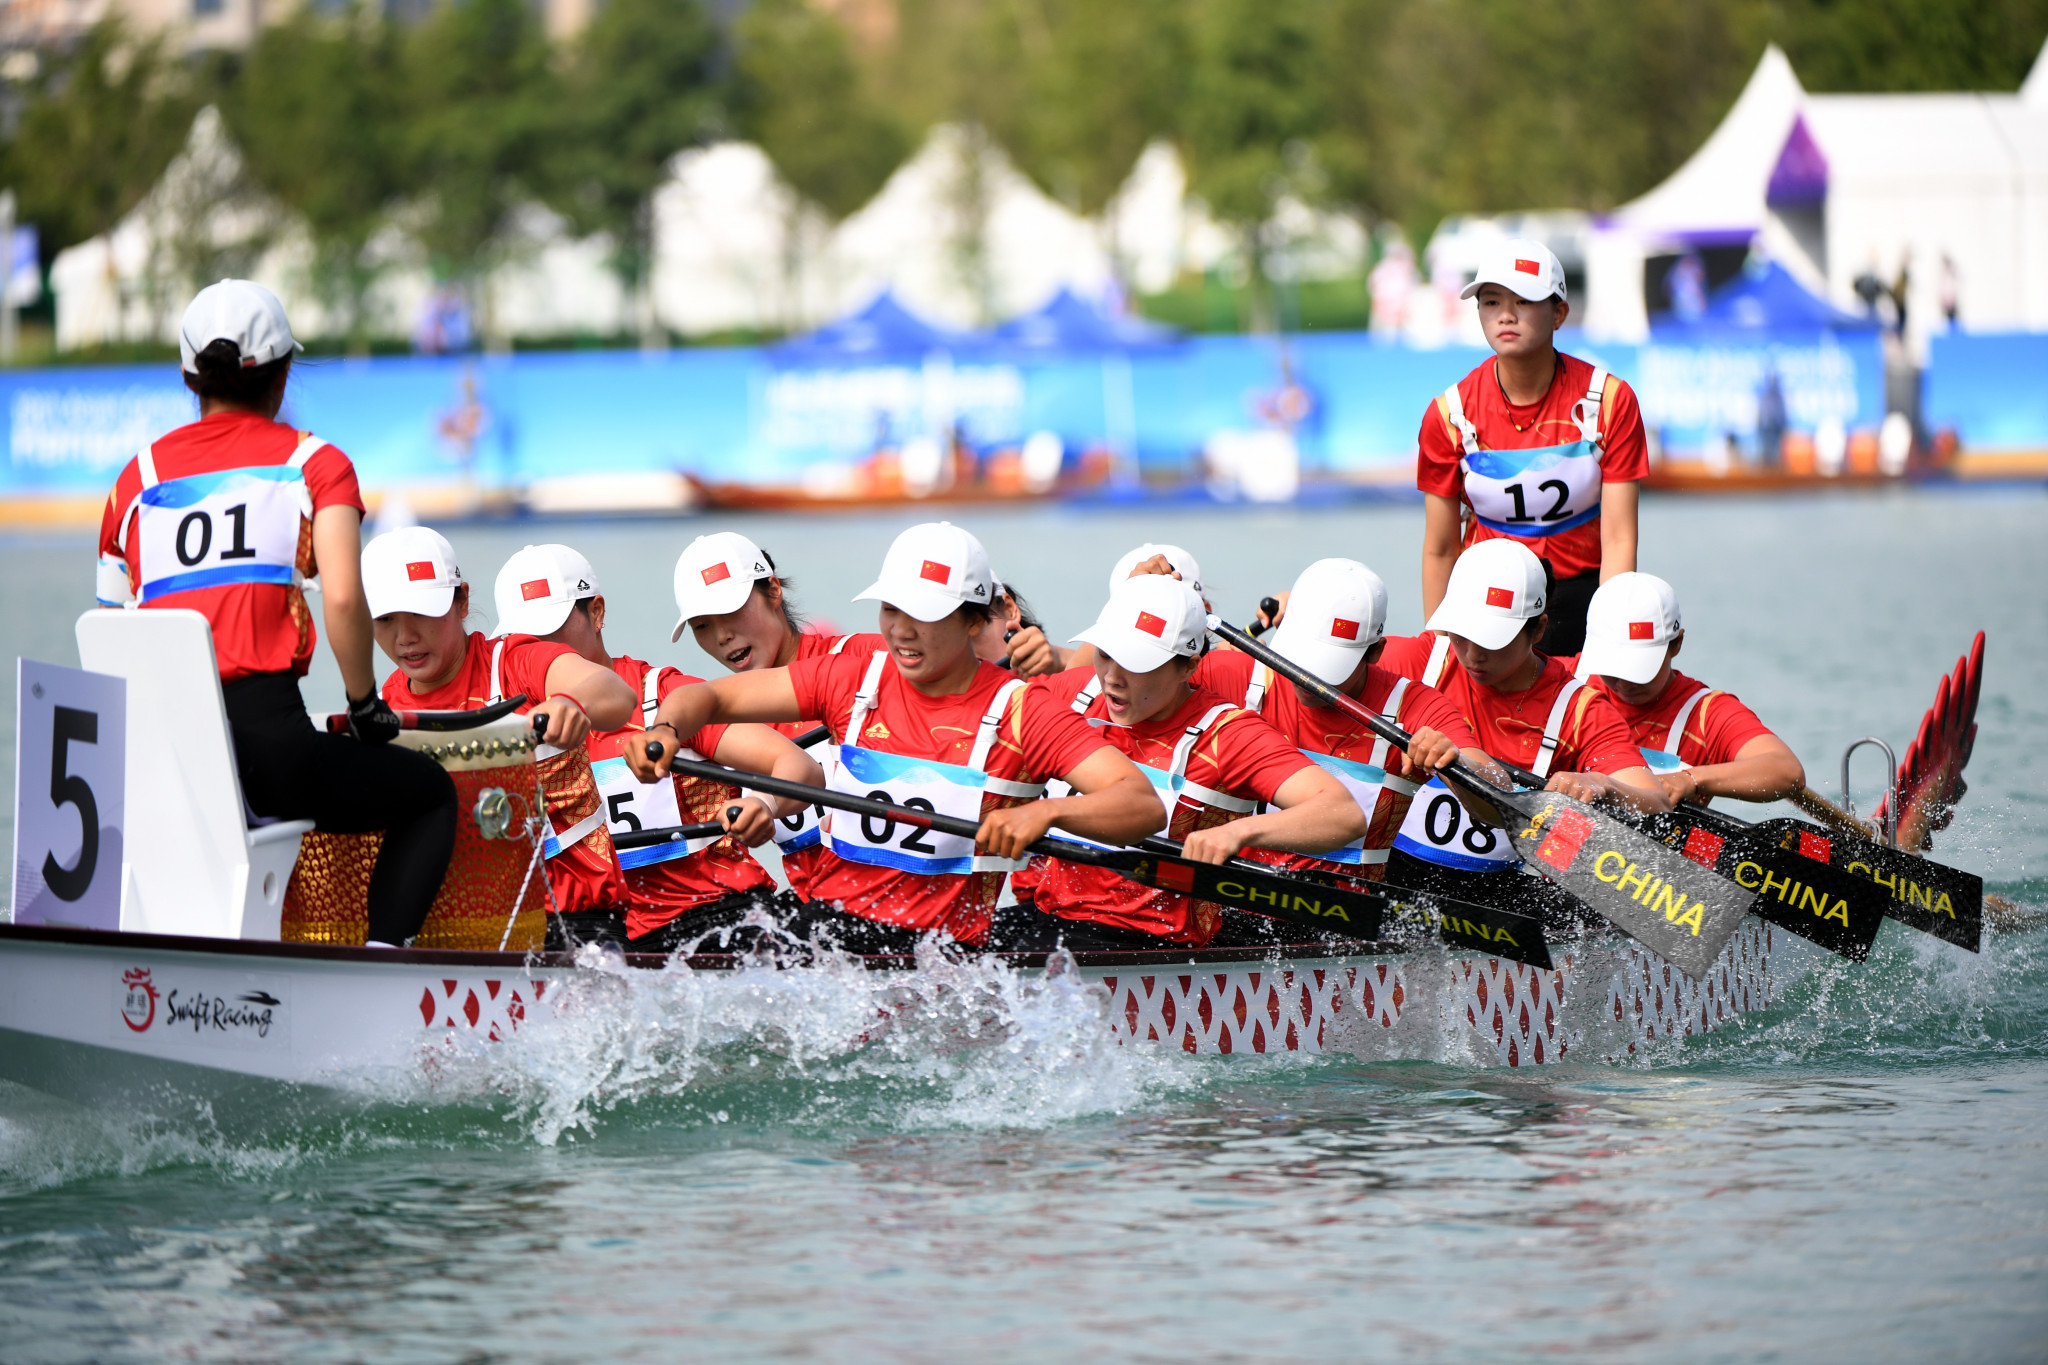 The host nation also won both gold medals in the dragon boat men's and women's sprint races today ©Hangzhou 2022